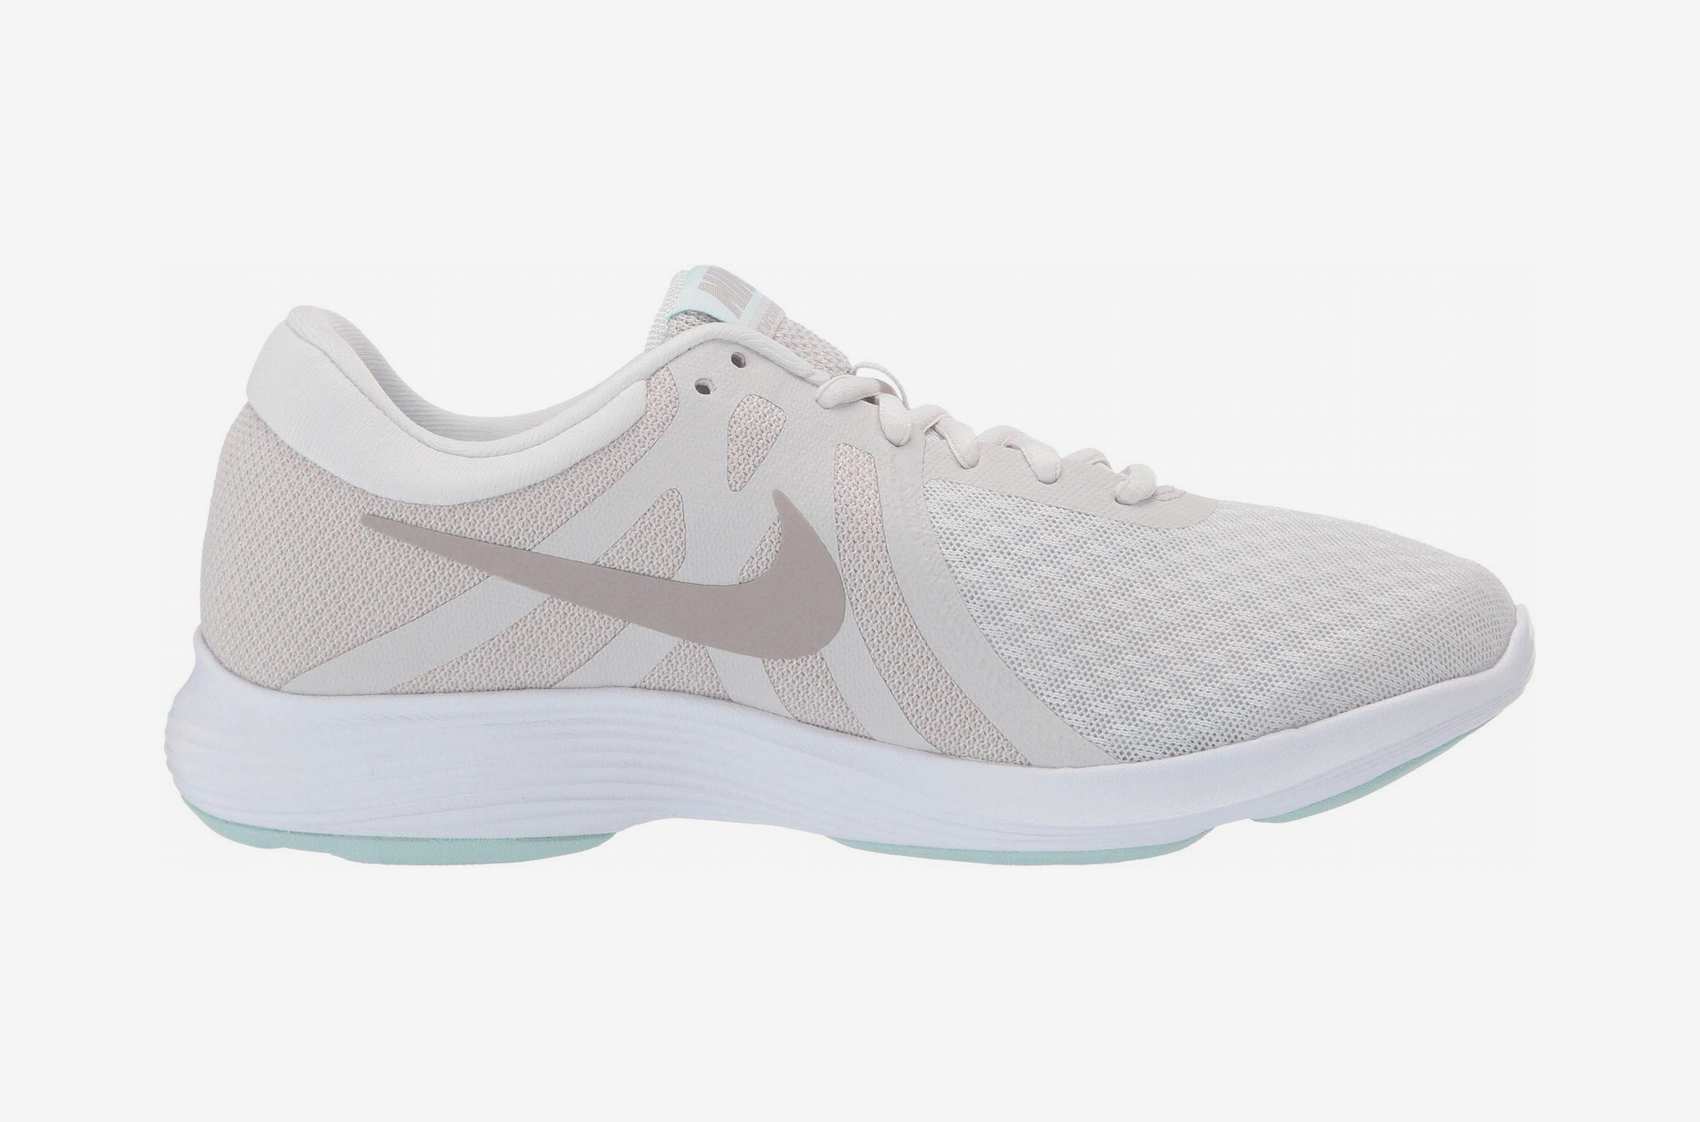 nike women's shoes expensive